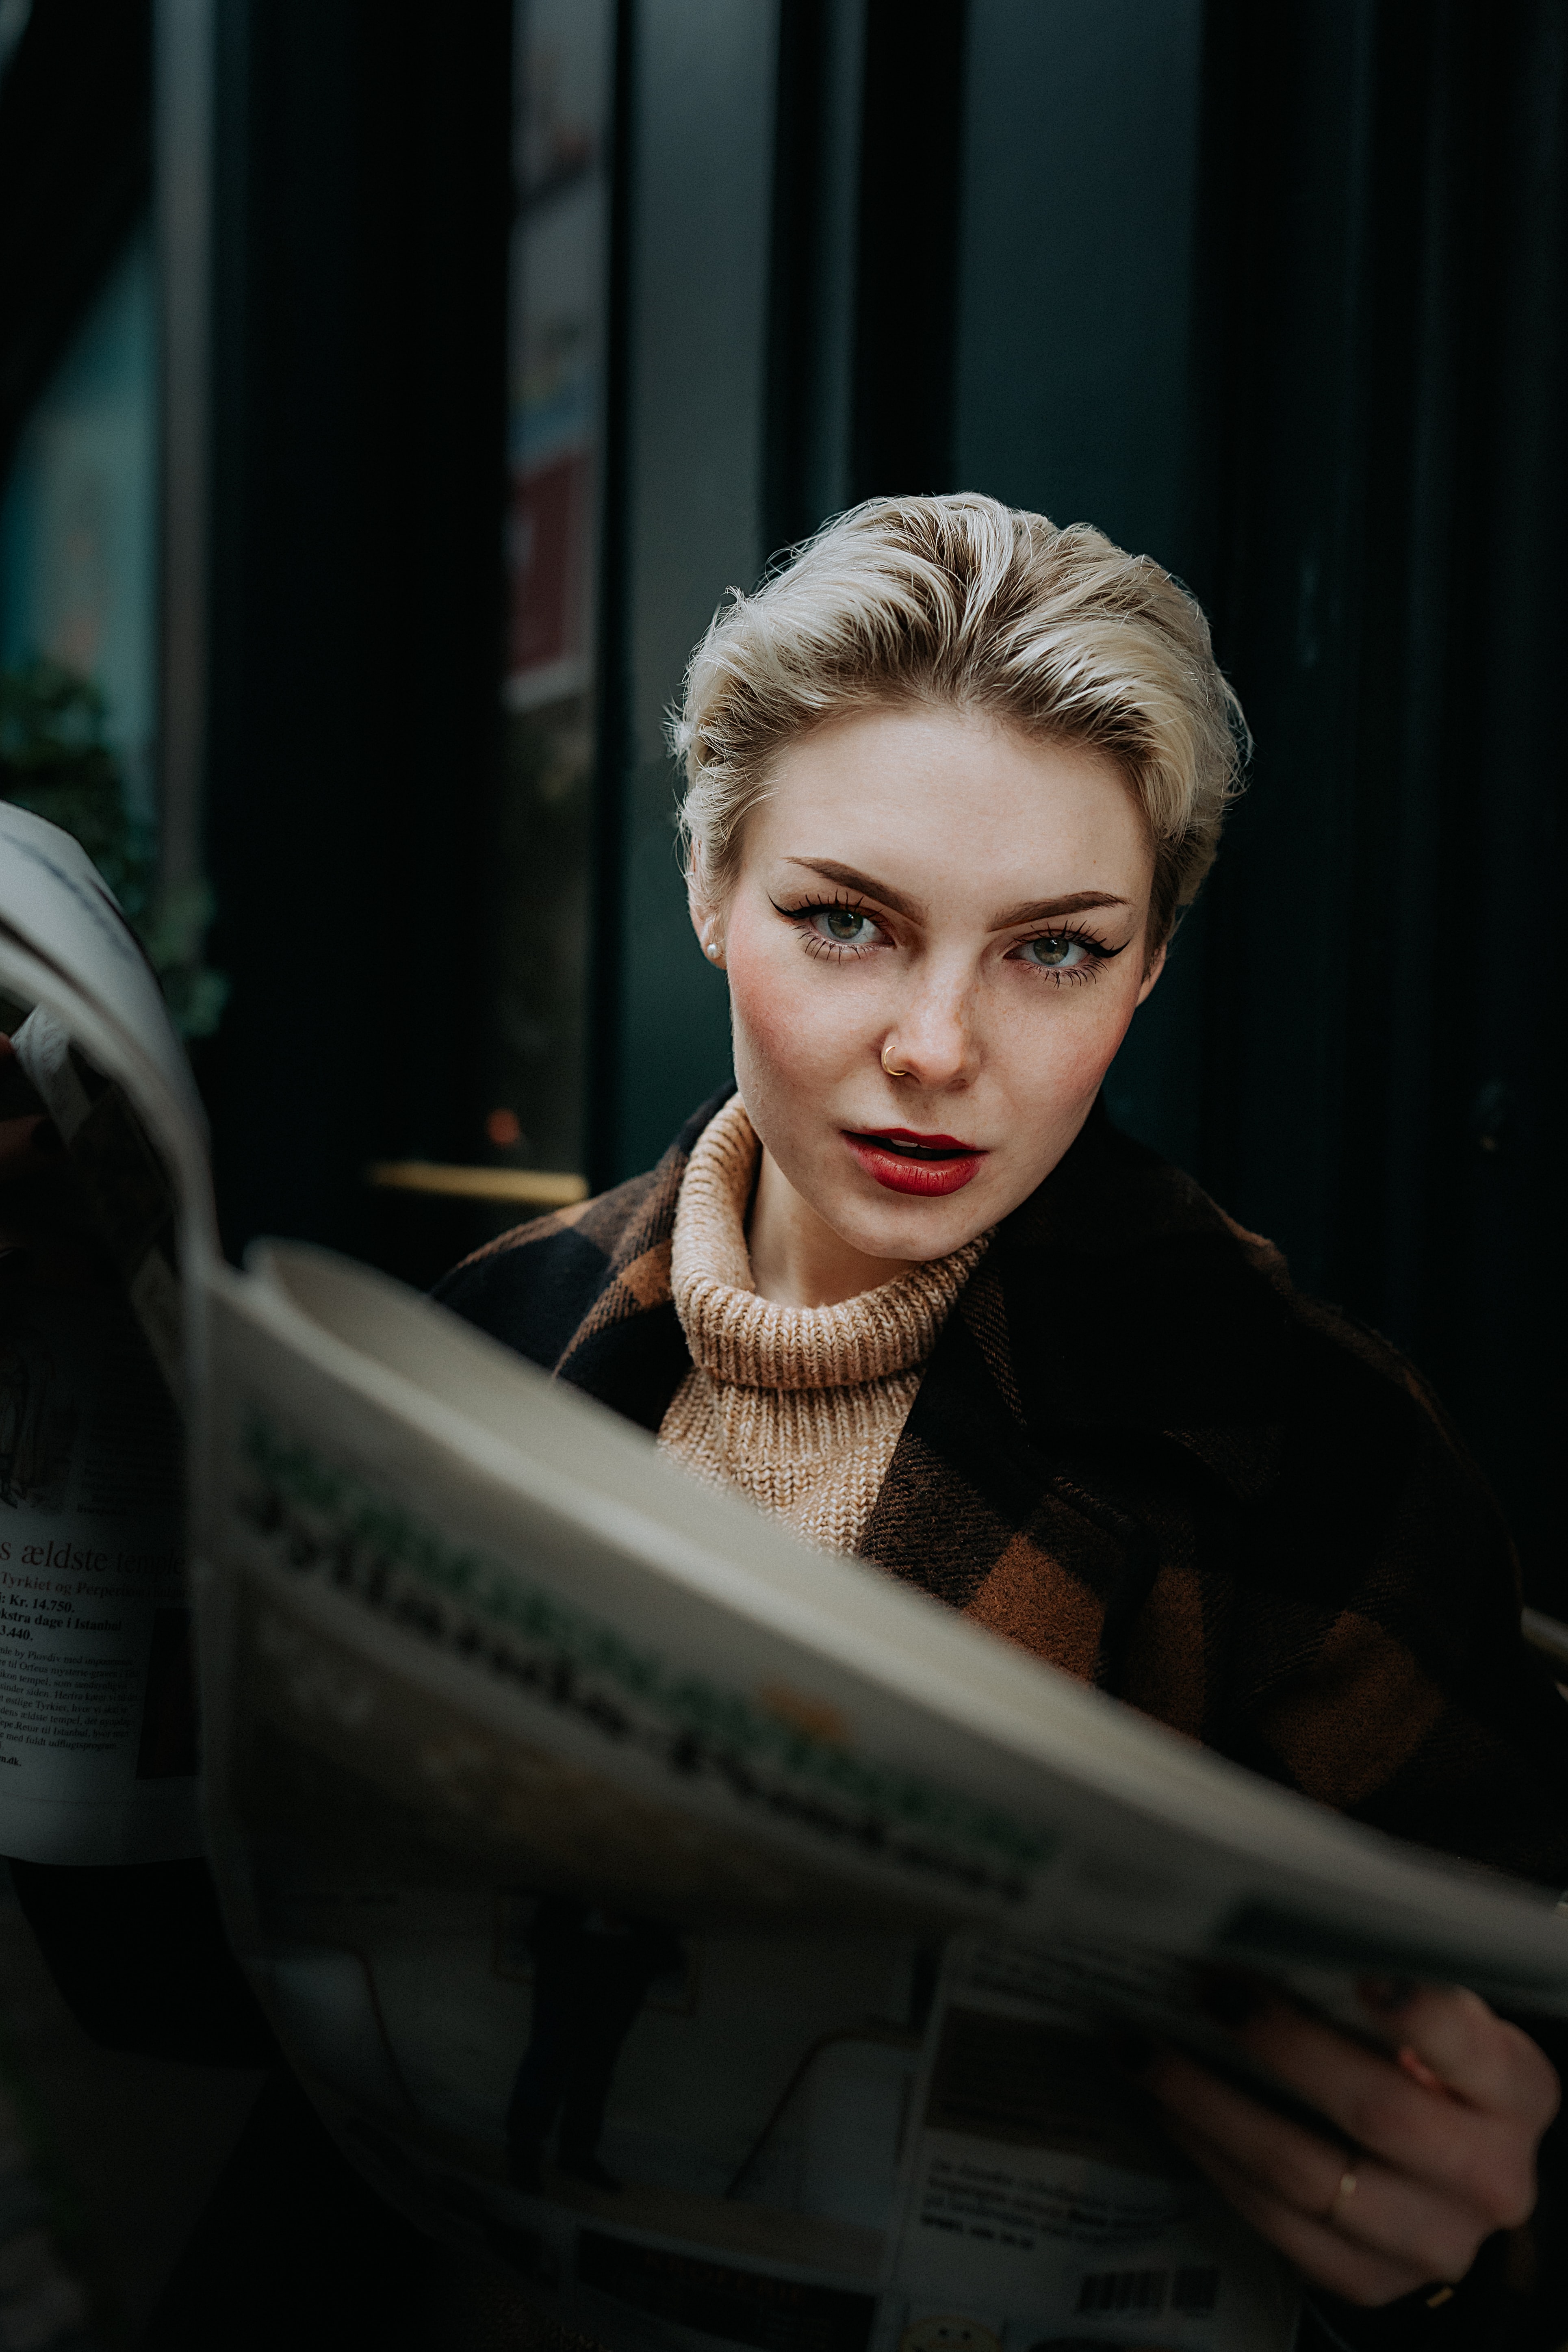 A beautiful, sophisticated woman with short blonde hair , darker roots, striking blue eyes, full eyebrows, and subtle red lipstick looking over the open full-size newspaper wearing a light brown turtle neck sweater. She appears to be sitting on darken subway bench seat however her face is well lite. She has a look as if she is waiting for an answer to a serious question she asked to the person in the perspective of the camera lens. 